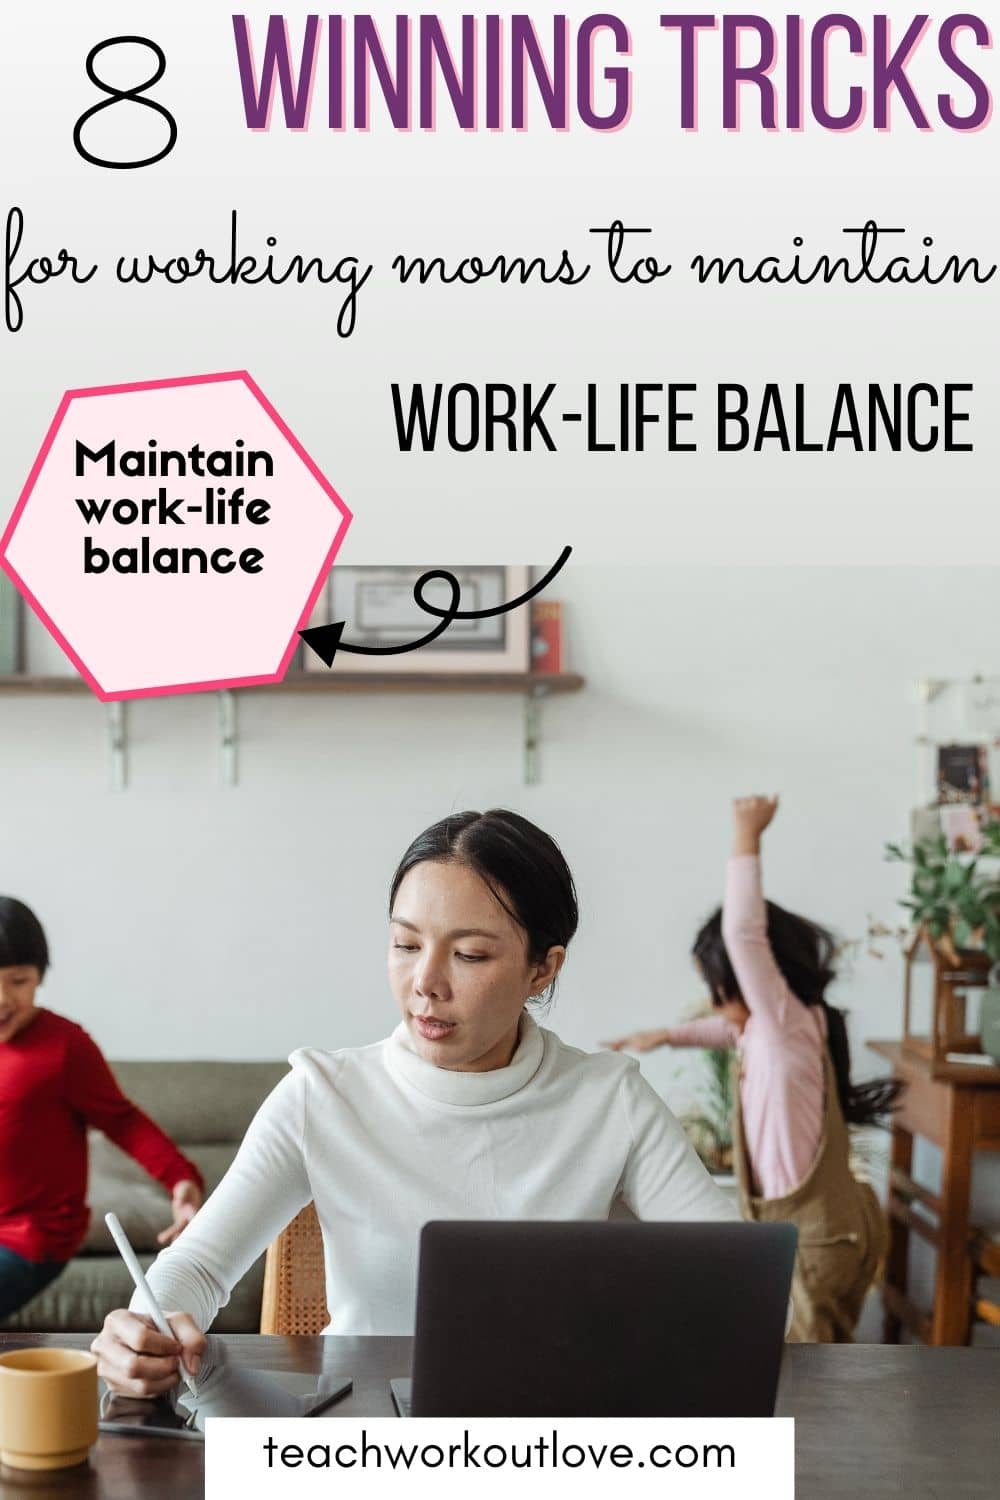 8 Tips for Helping Working Women to Maintain a Healthy Workplace